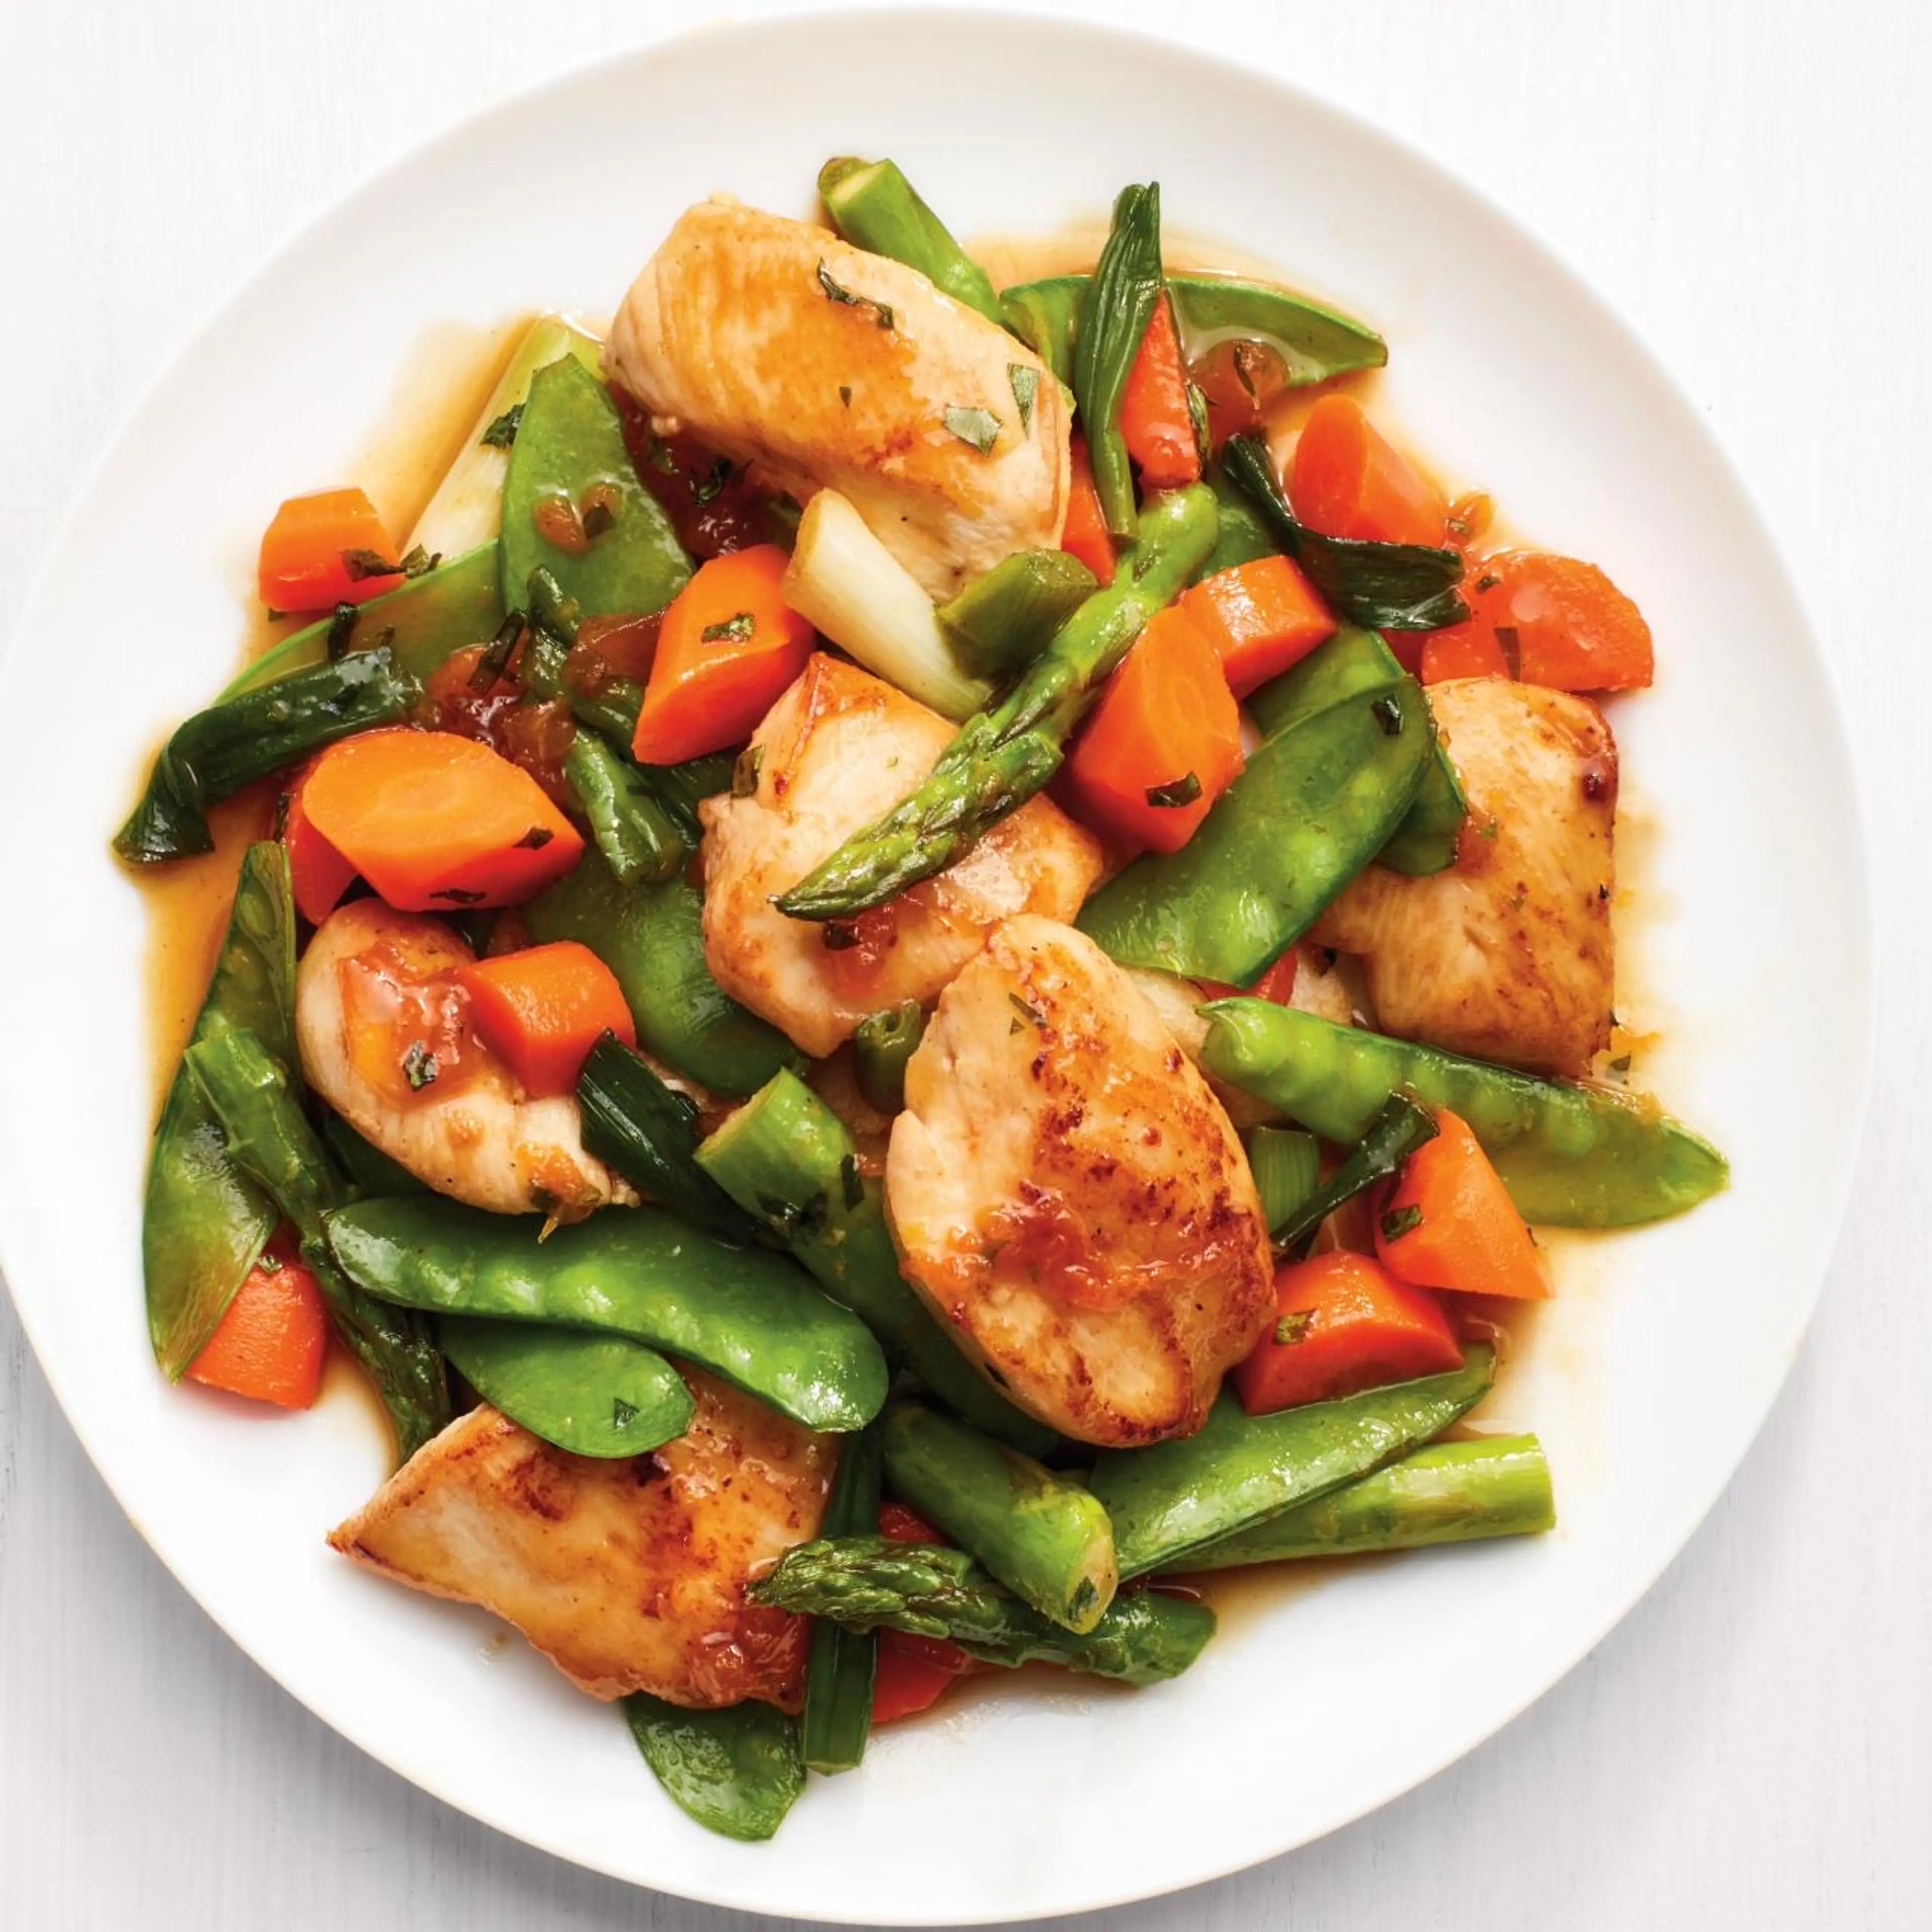 Apricot-Glazed Chicken with Spring Vegetables